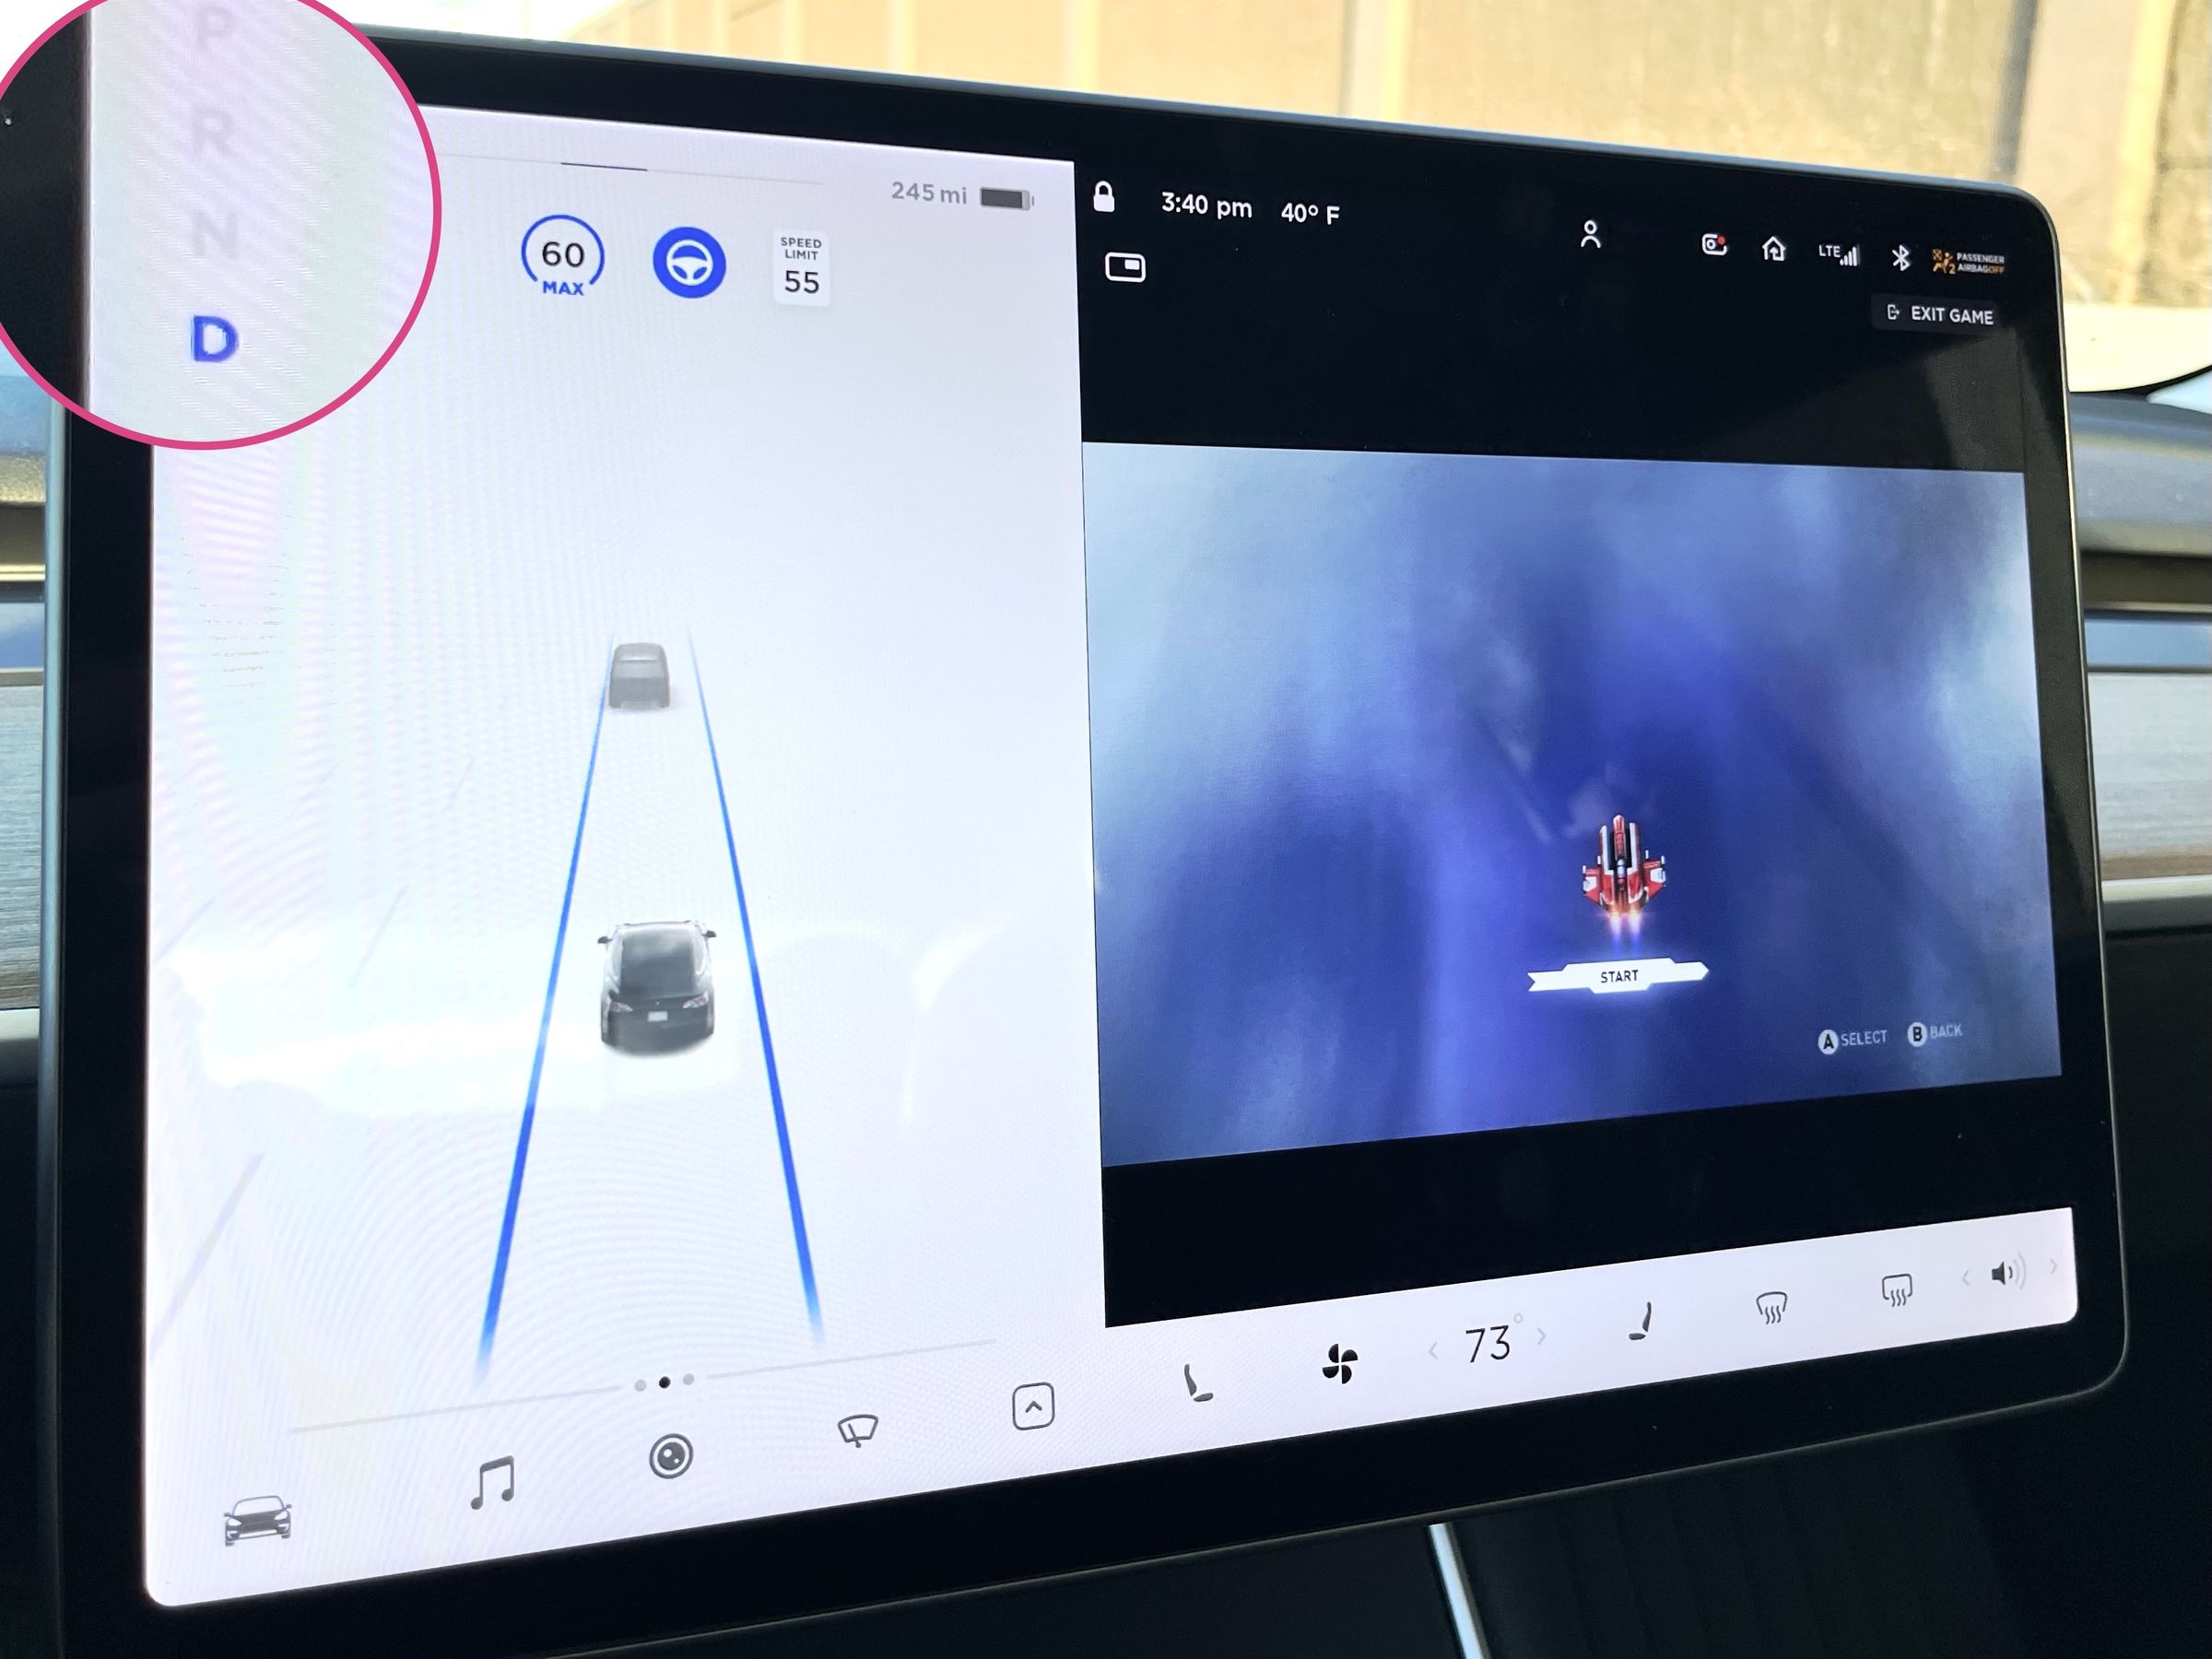 The Tesla center screen is displaying a video game running with a jet craft flying over an ocean, while also displaying the status of the Tesla vehicle in drive and running on autopilot